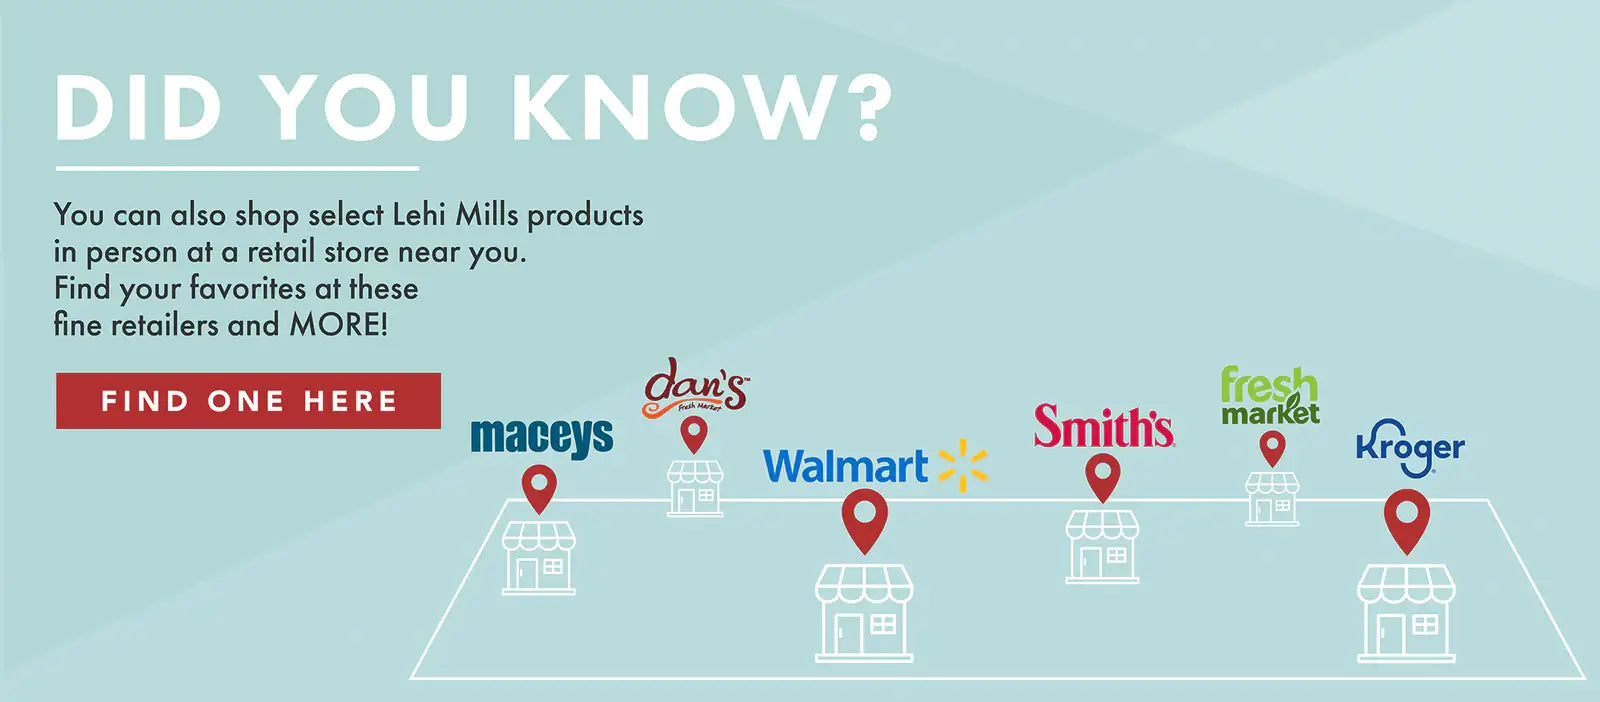 Find Lehi Mills Quality Baking Mixes in a Store Near You